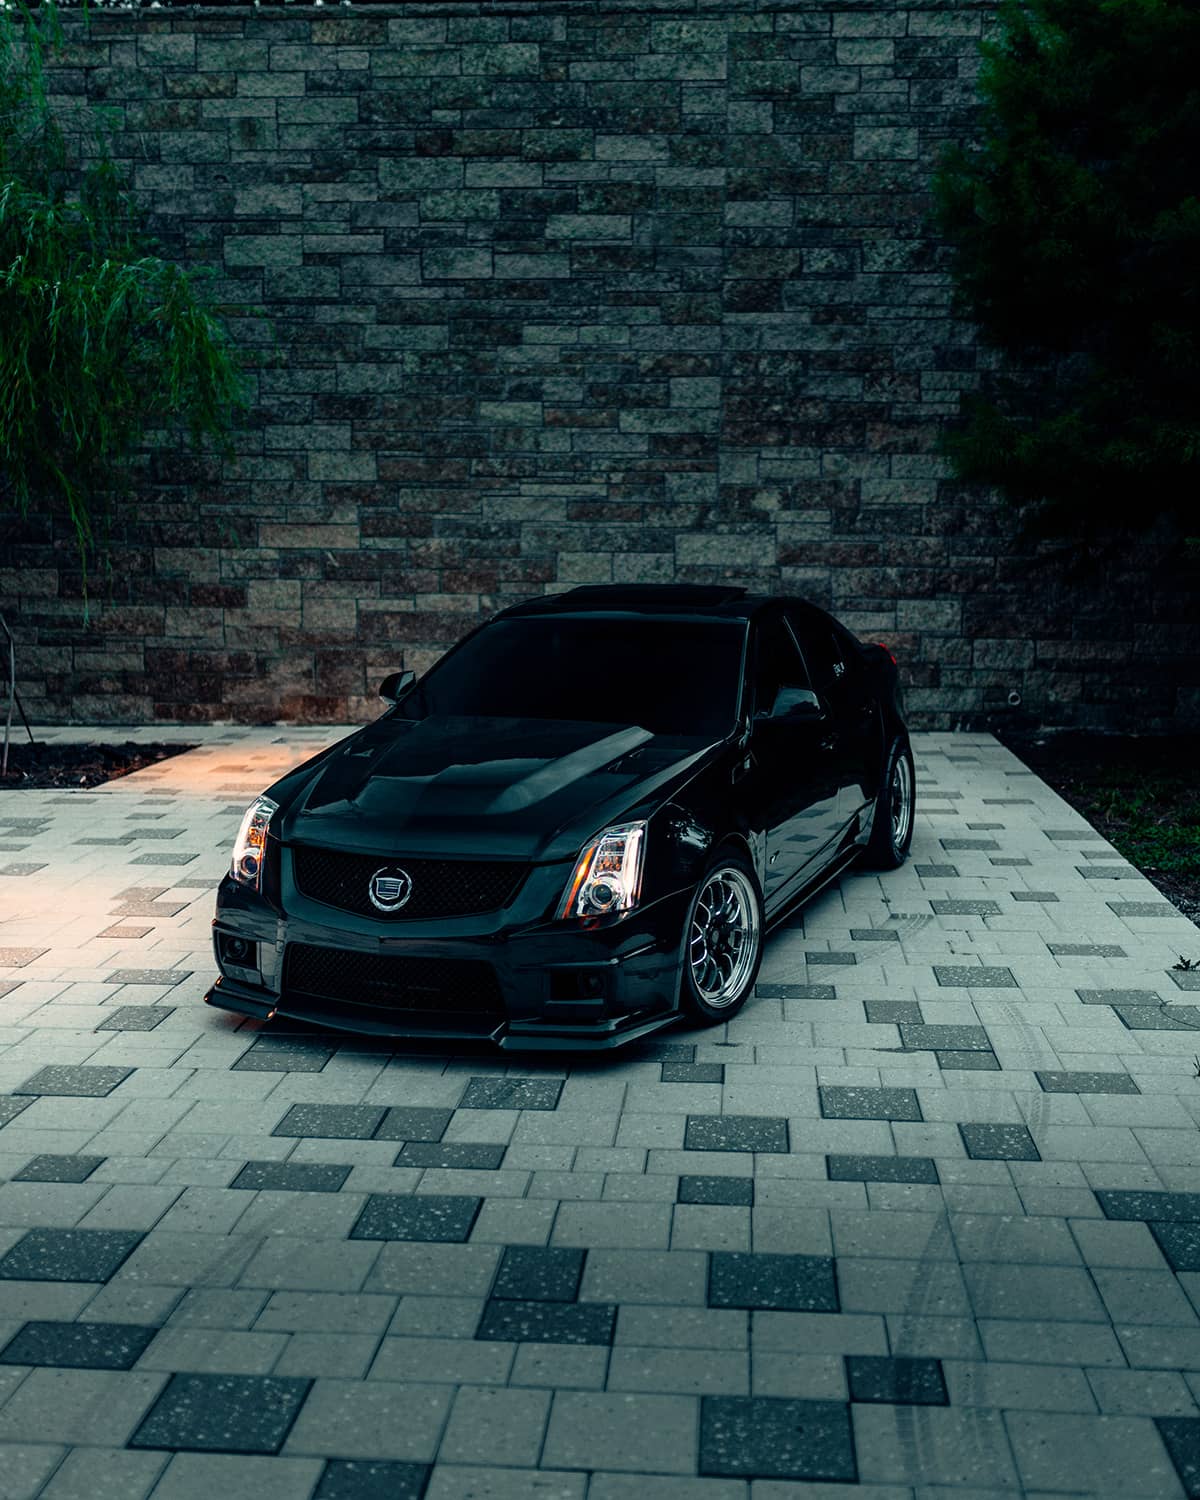 Modified and blacked out Cadillac CTS-V sedan on Welds